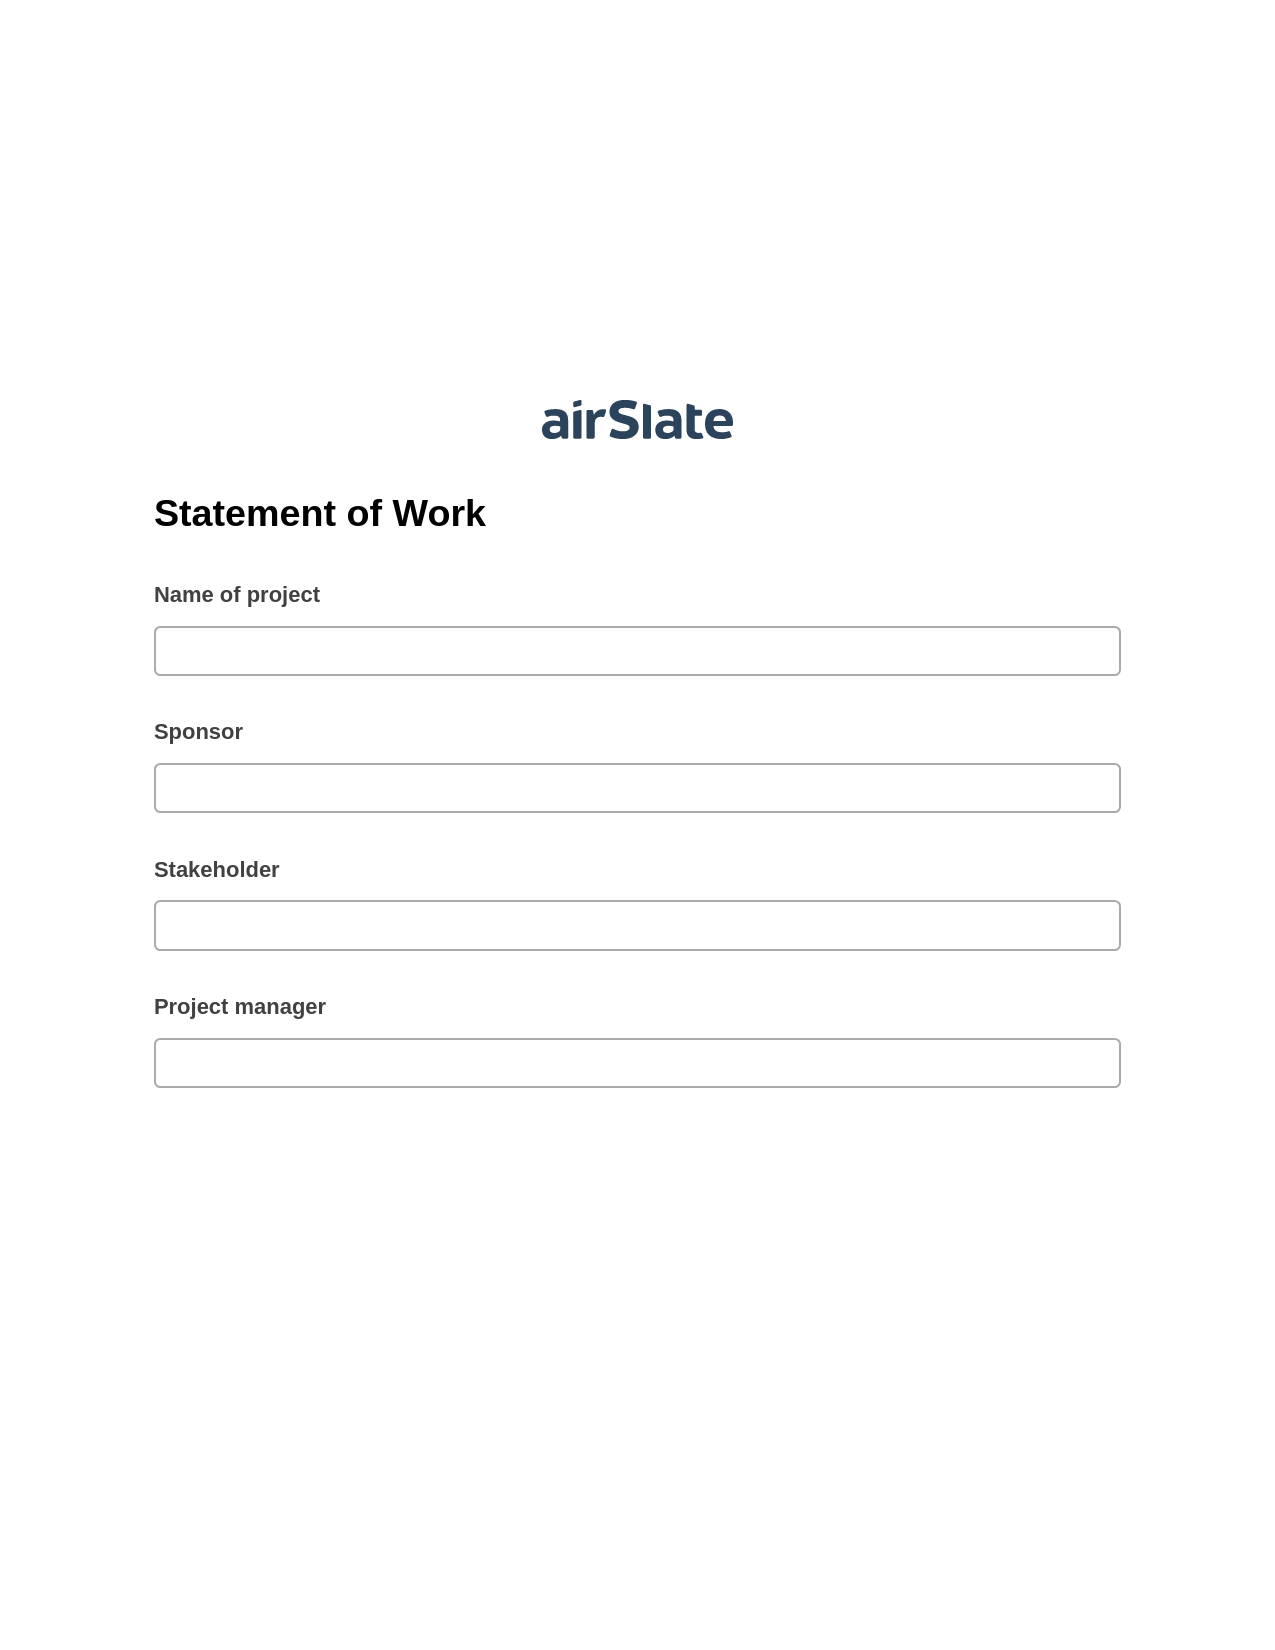 Statement of Work Pre-fill from another Slate Bot, Create Salesforce Record Bot, Post-finish Document Bot